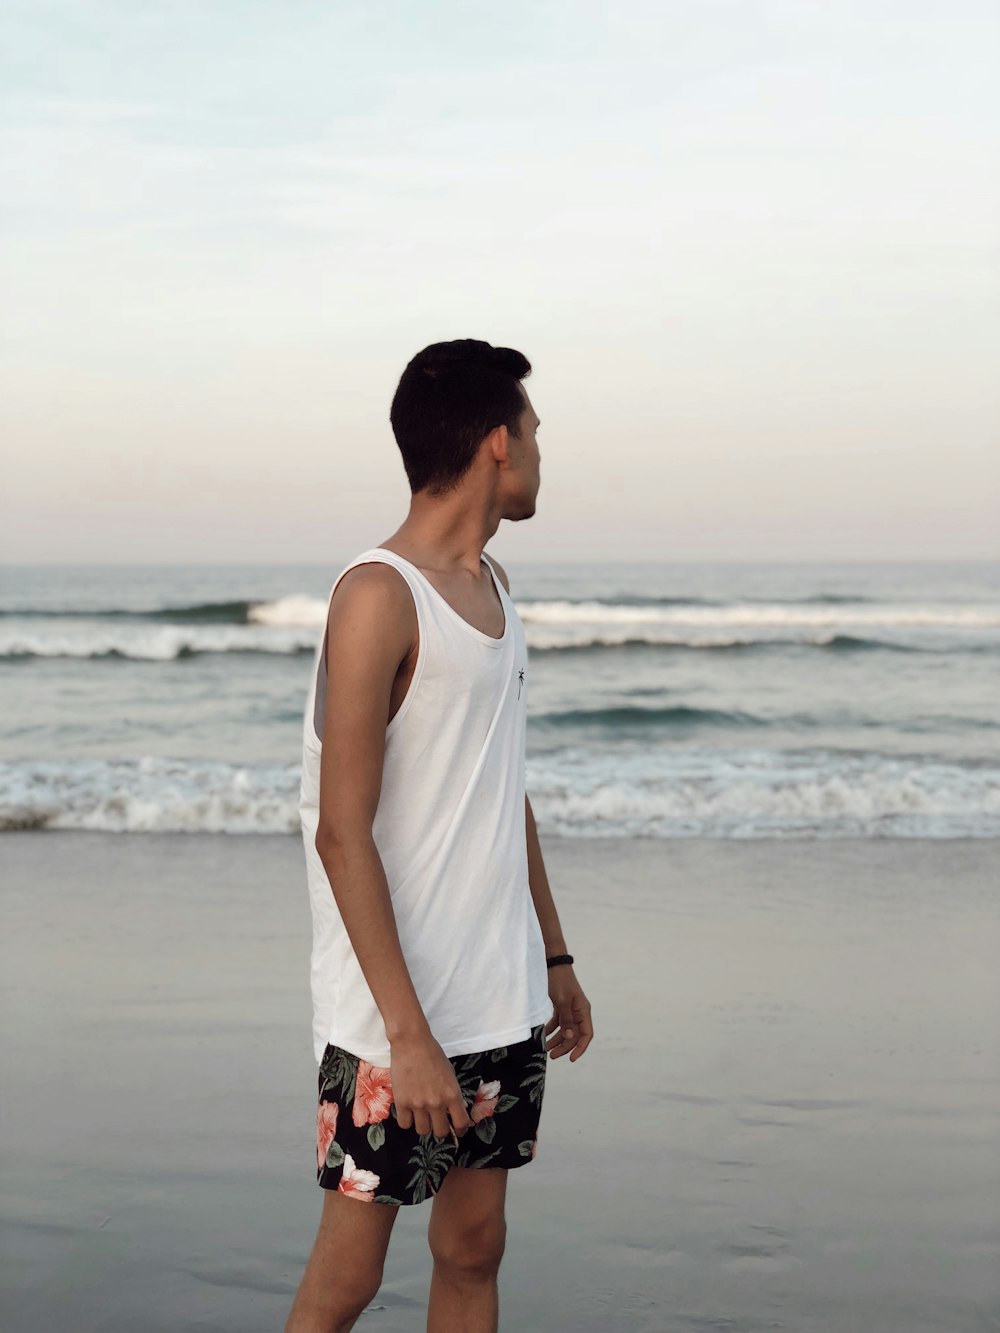 man in white tank top standing on beach during daytime